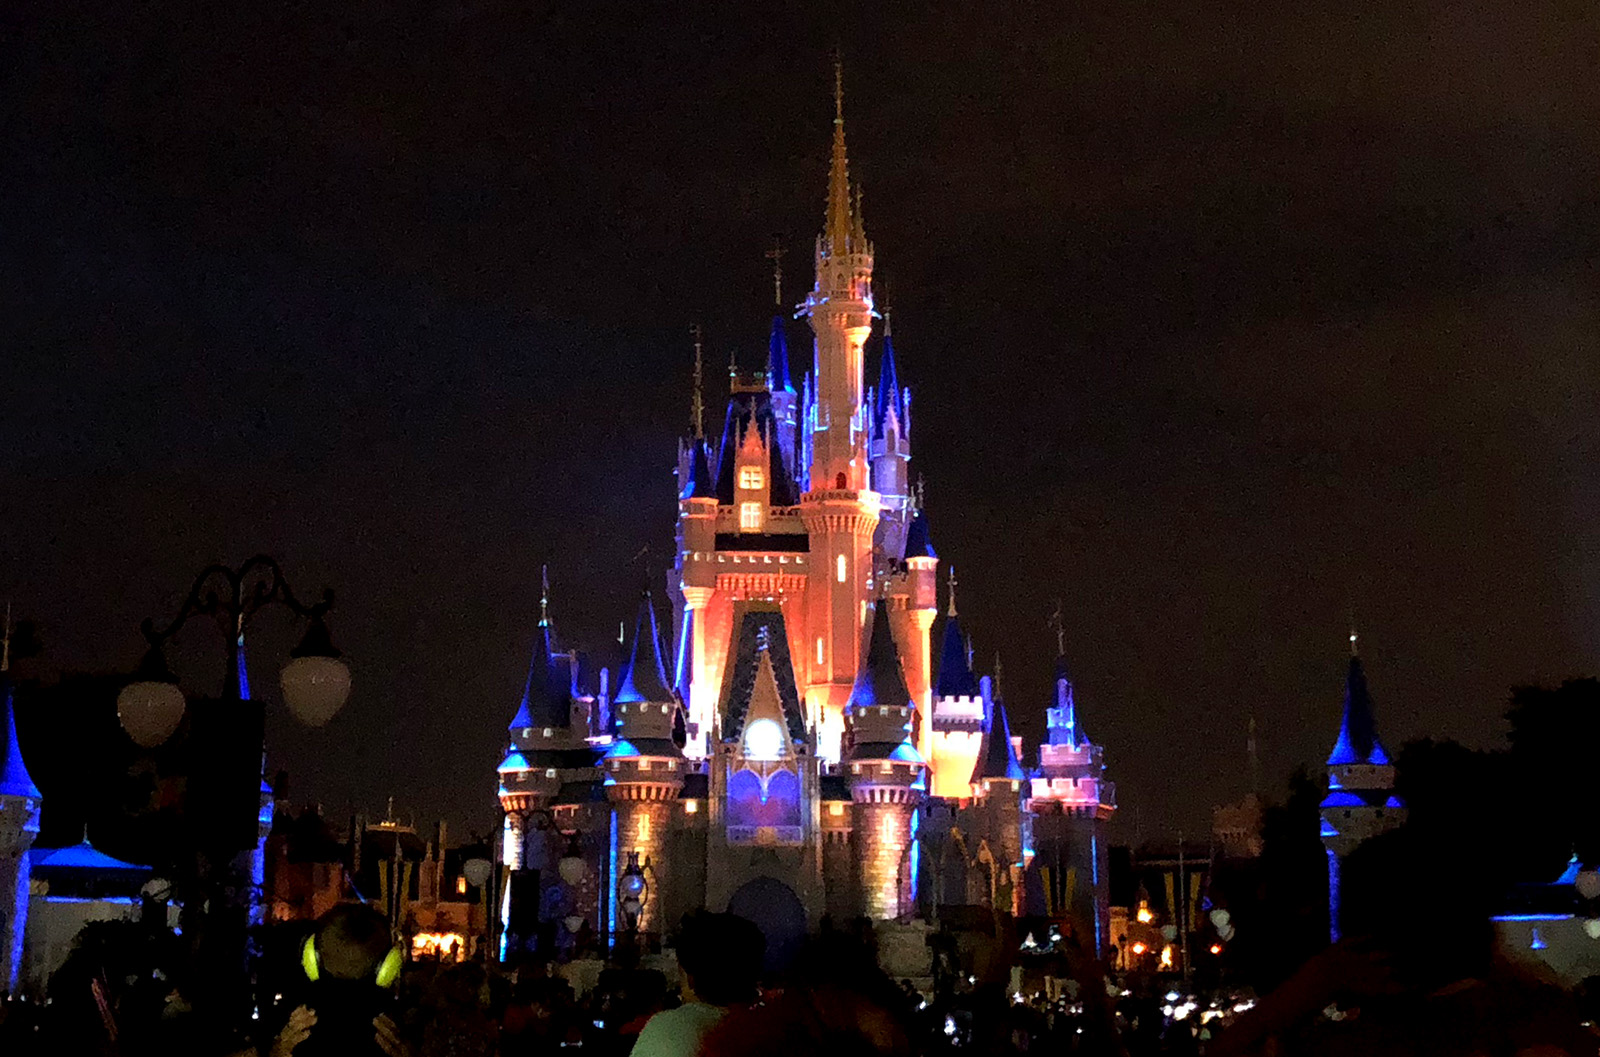 cinderella castle at disney world at night lit dramatically before a fireworks show